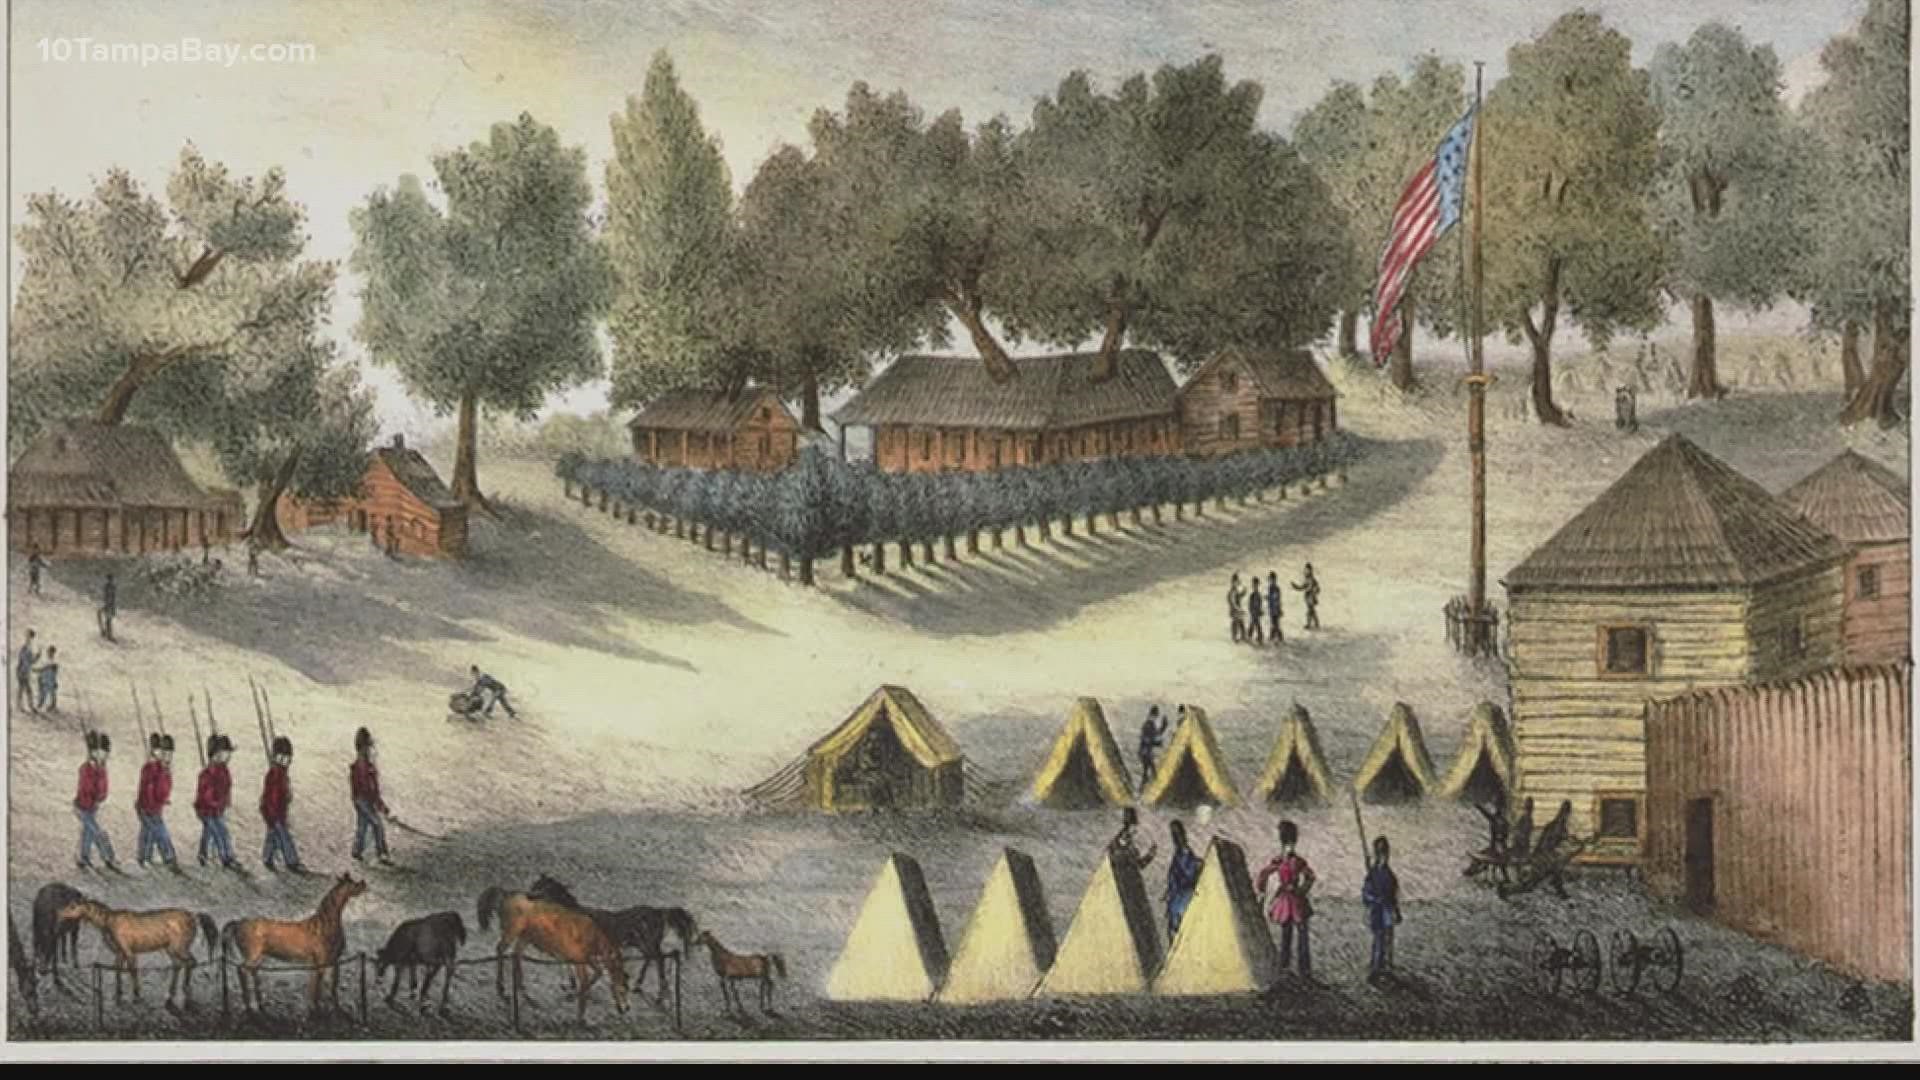 The history of the Seminole people being captured and forced from Florida has roots in downtown Tampa where the U.S. military post, Fort Brooke, was established.